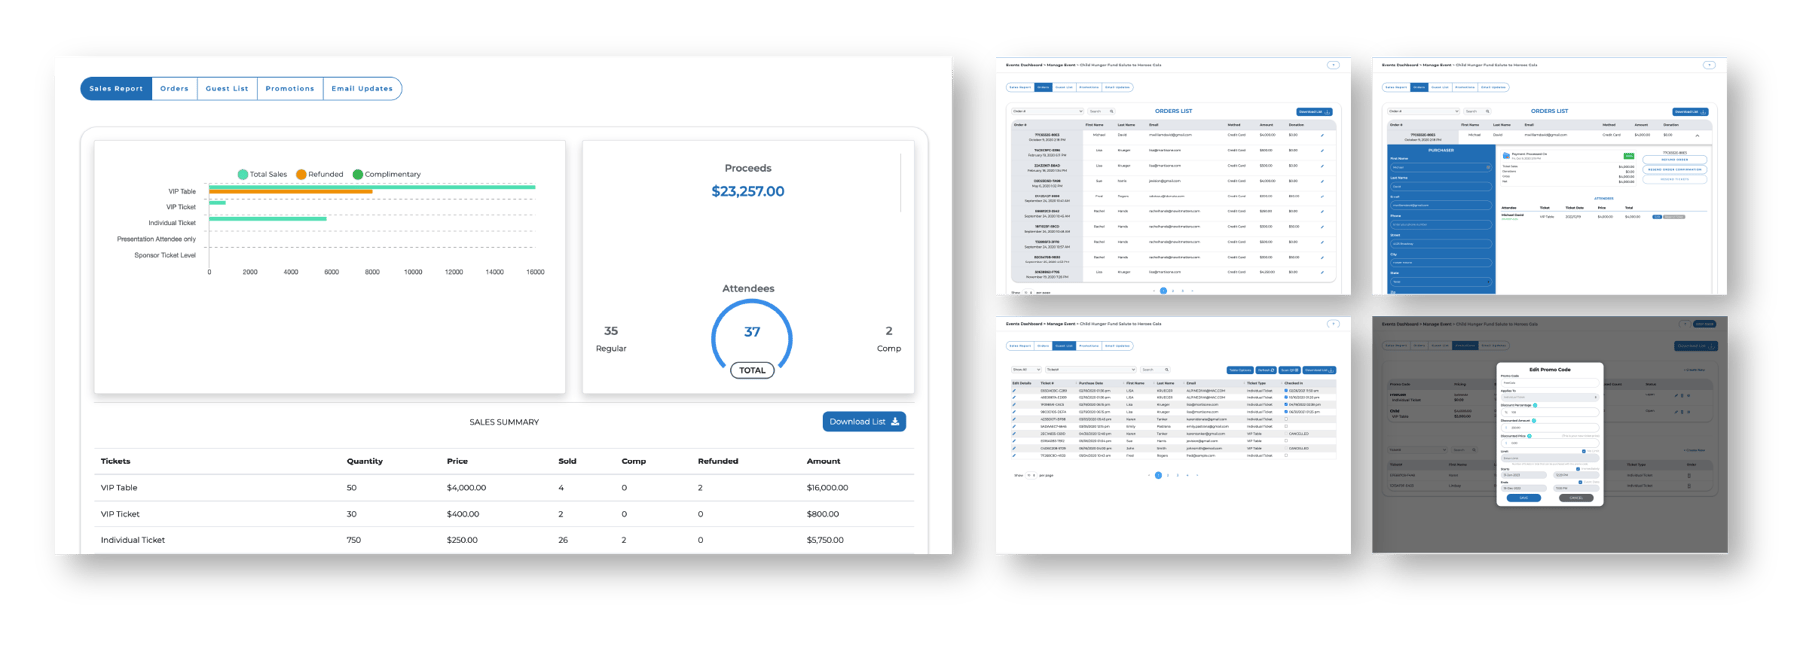 iDonate Events Management Reporting Dashboards